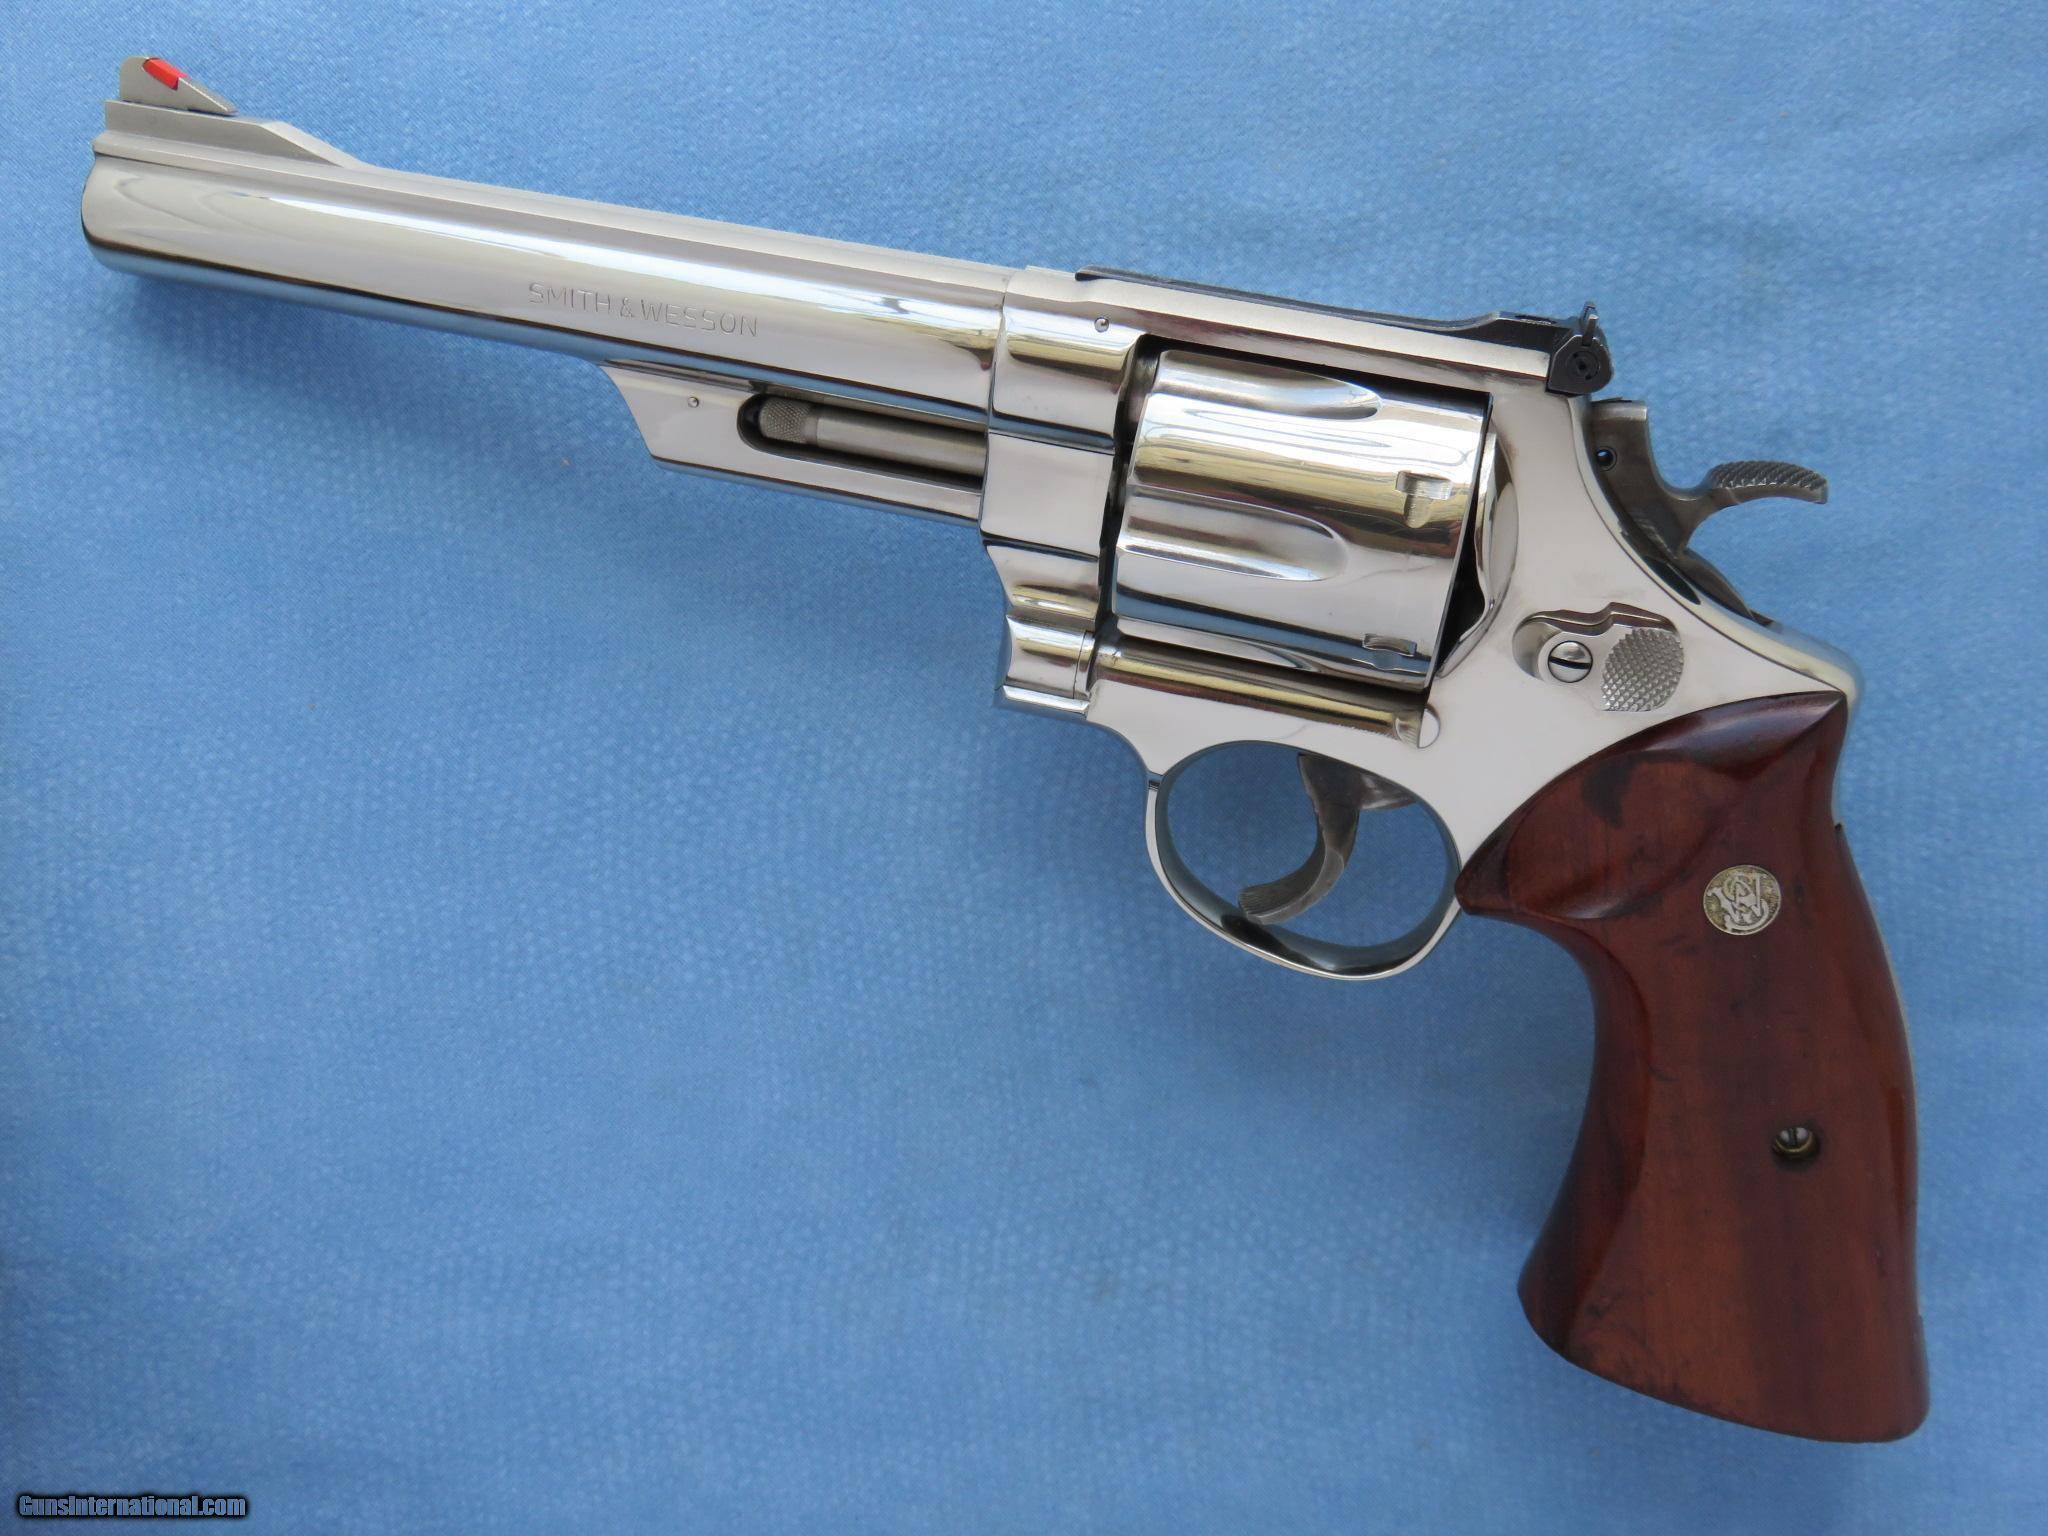 Smith & wesson model 29 - smith & wesson model 29 - qwe.wiki